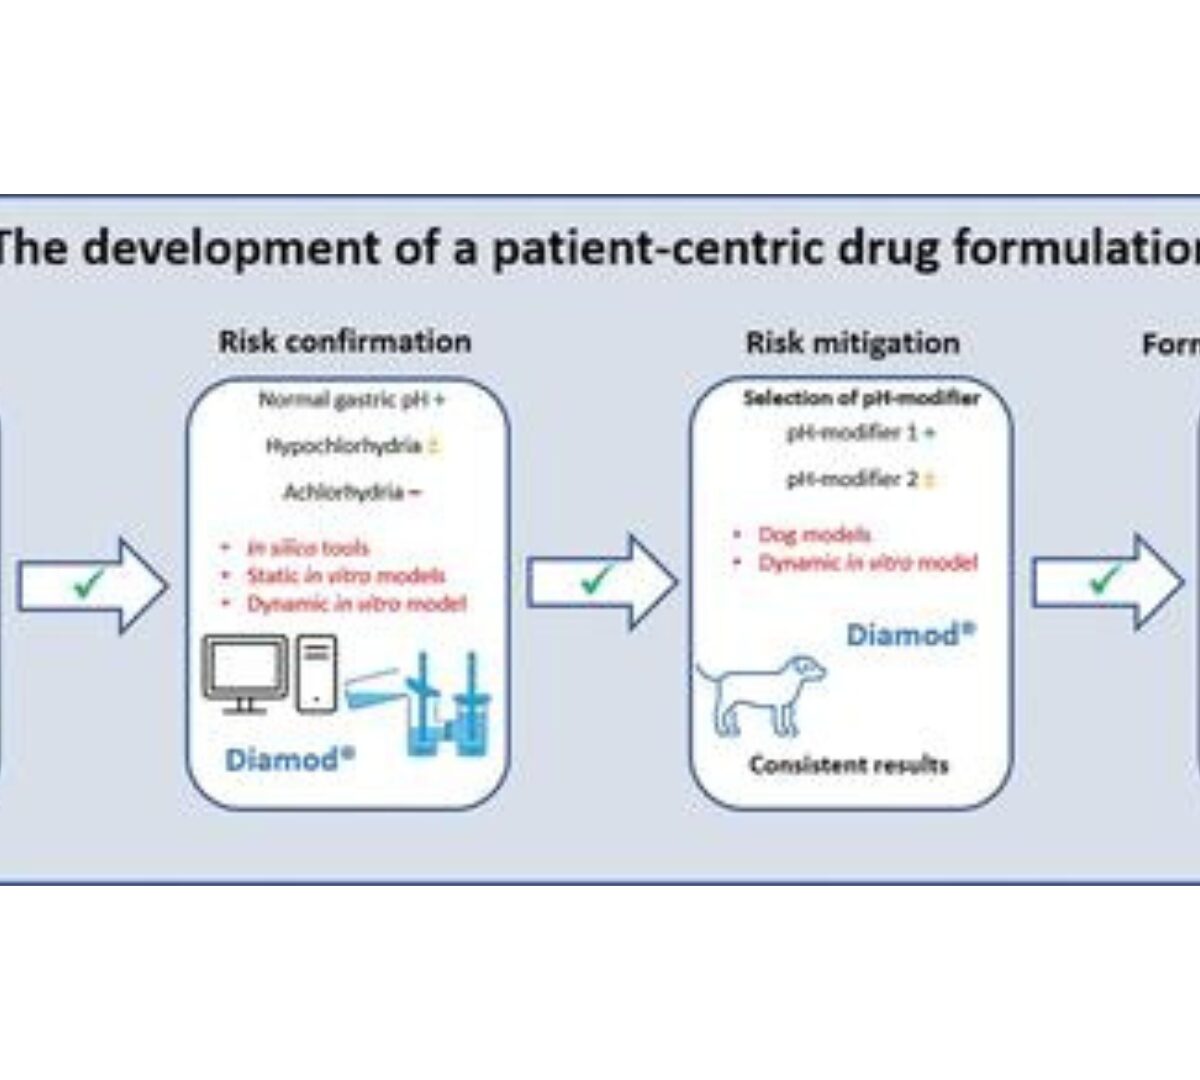 Contribution of the Dynamic Intestinal Absorption Model (Diamod) to the Development of a Patient-Centric Drug Formulation